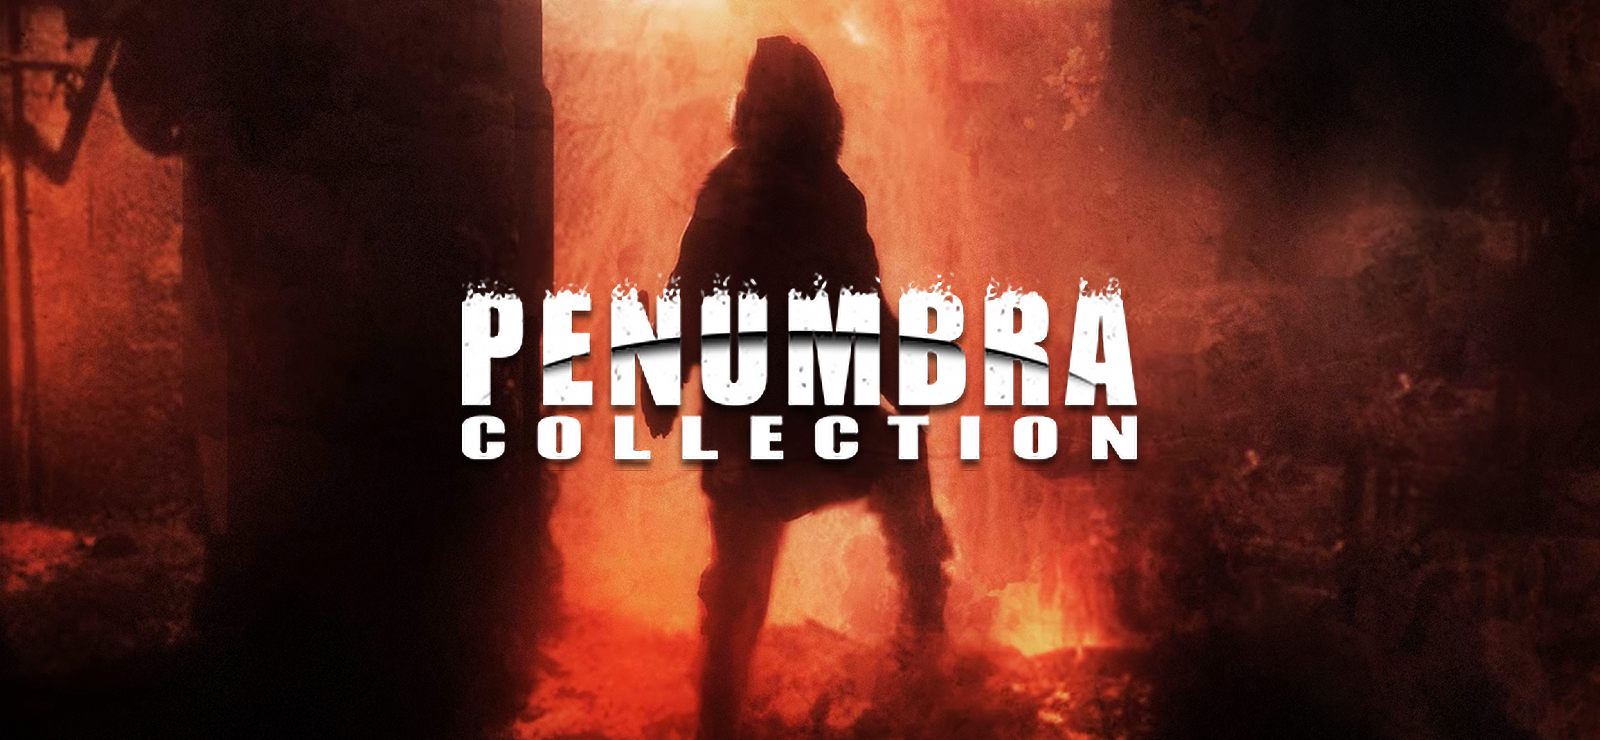 The Penumbra Collection